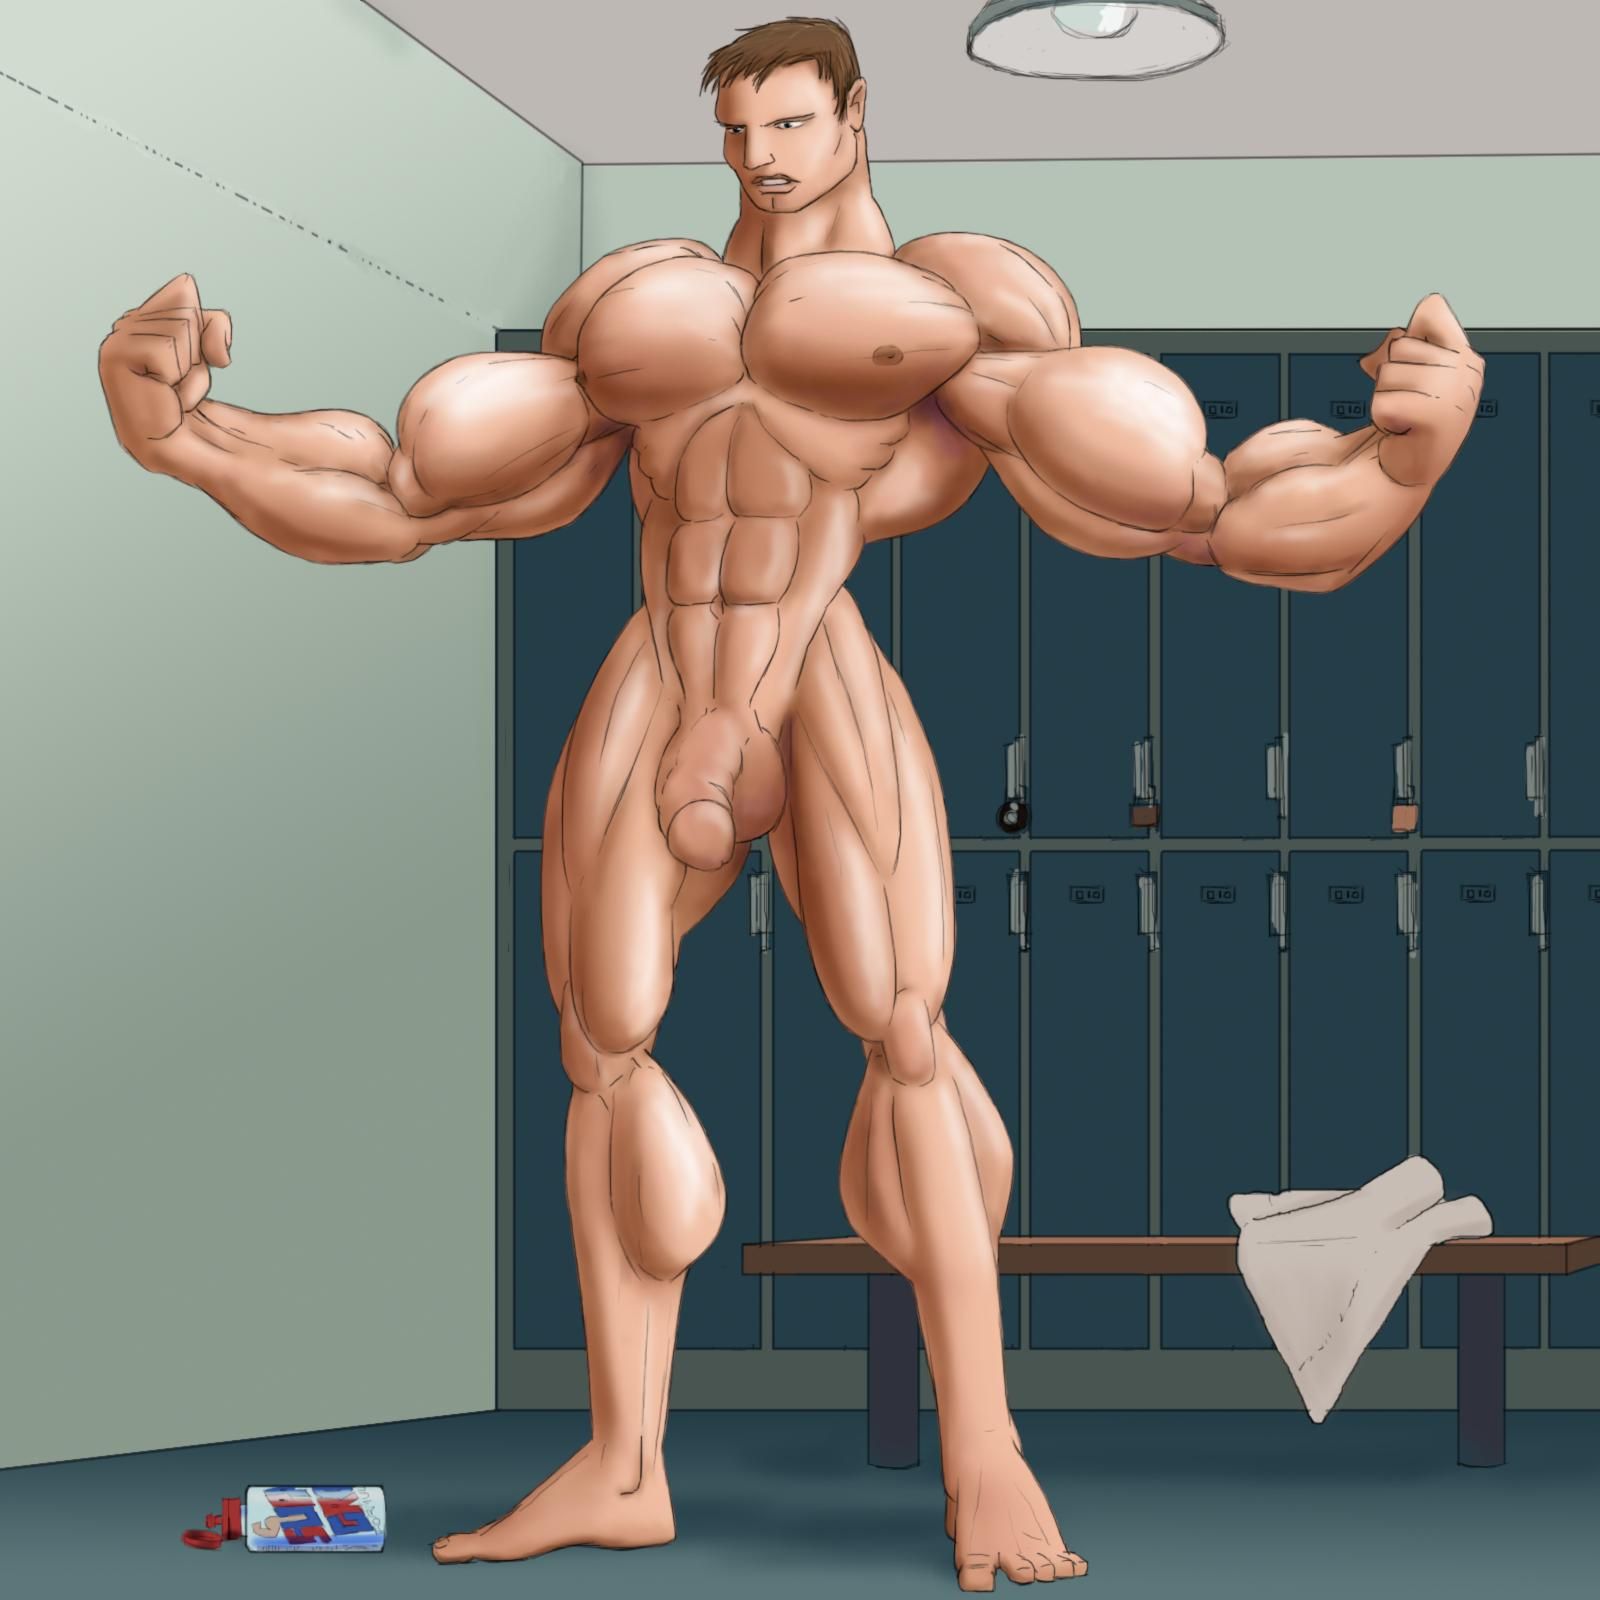 Erotic muscle growth